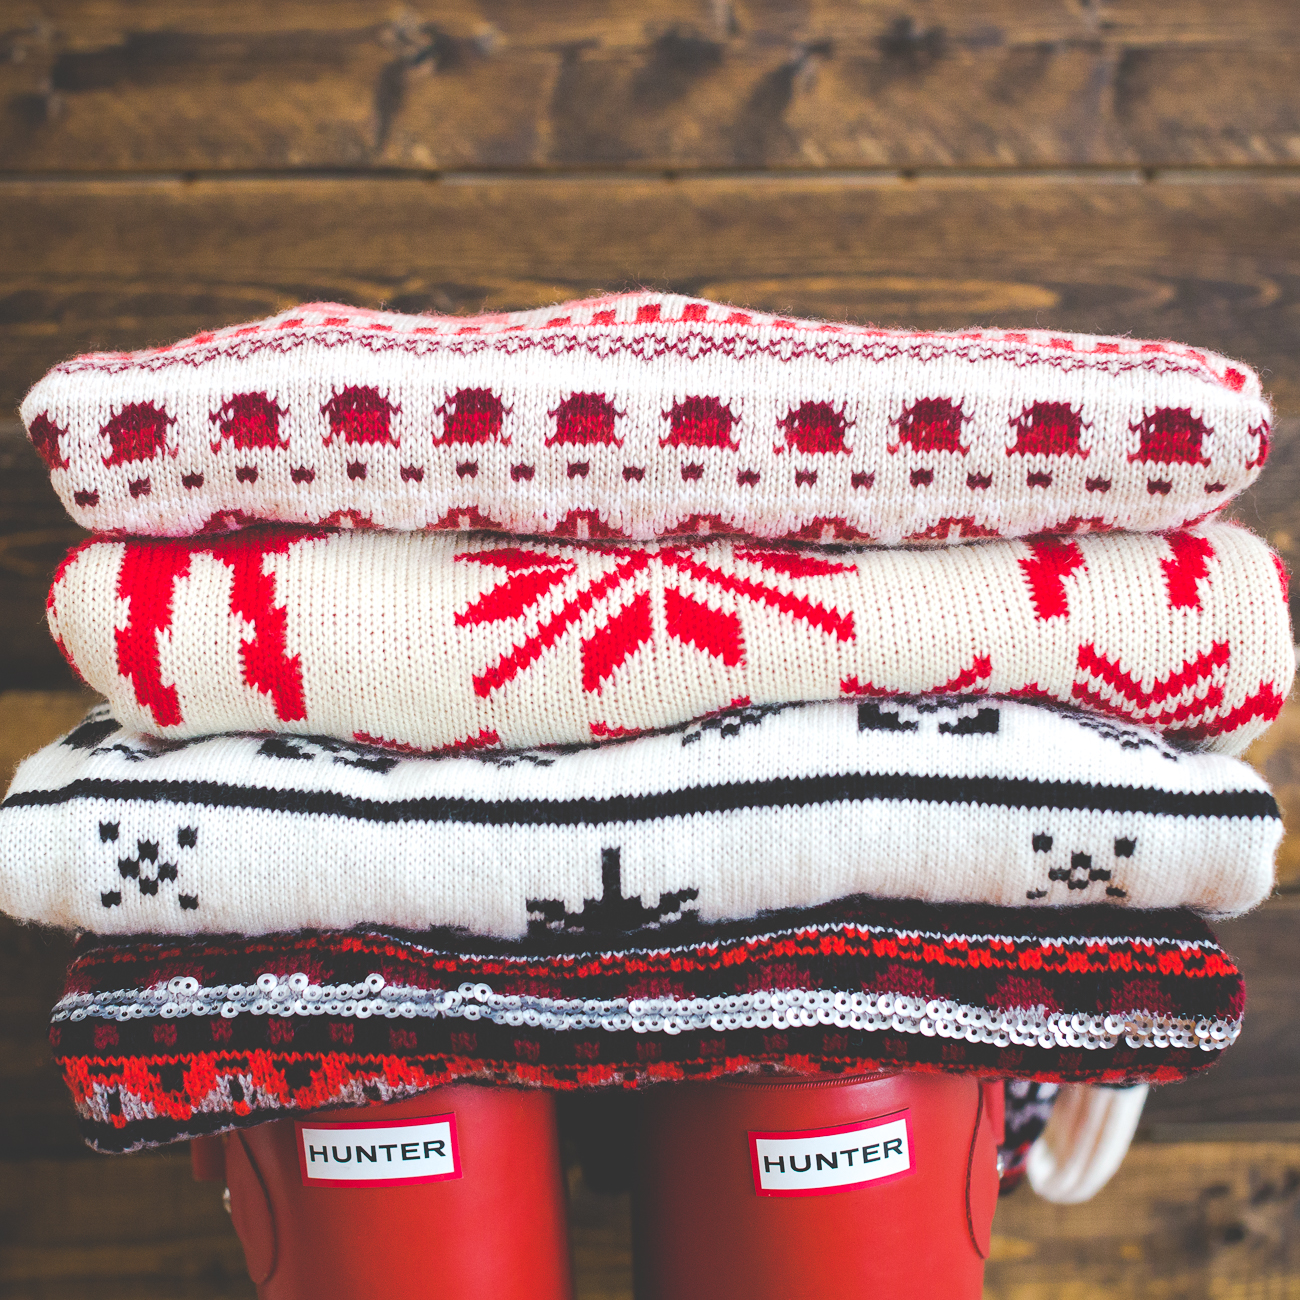 holiday gift ideas, fair isle sweater, hunter boots, christmas decorations, christmas gift ideas, holiday gift guide, christmas presents, the holiday shop, what to buy for christmas // grace wainwright a southern drawl